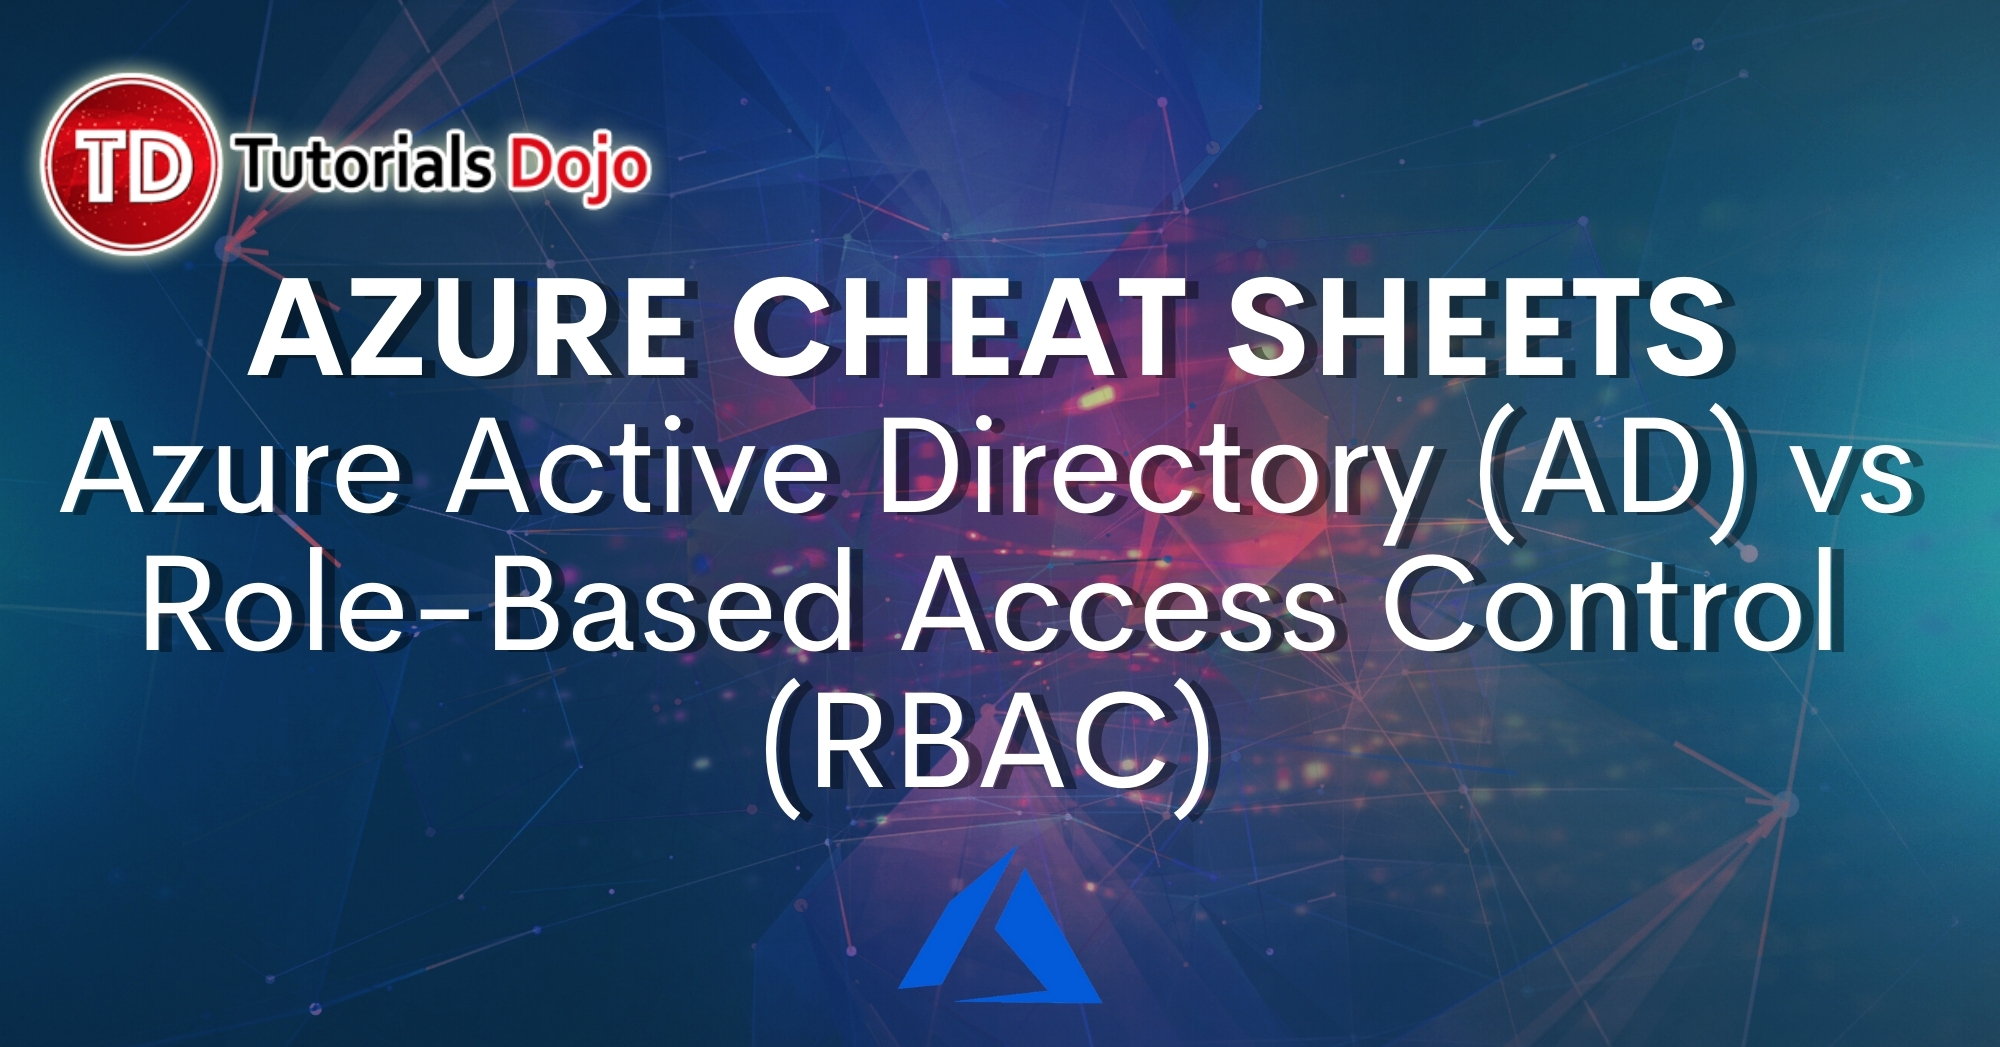 Azure Active Directory (AD) vs Role-Based Access Control (RBAC)